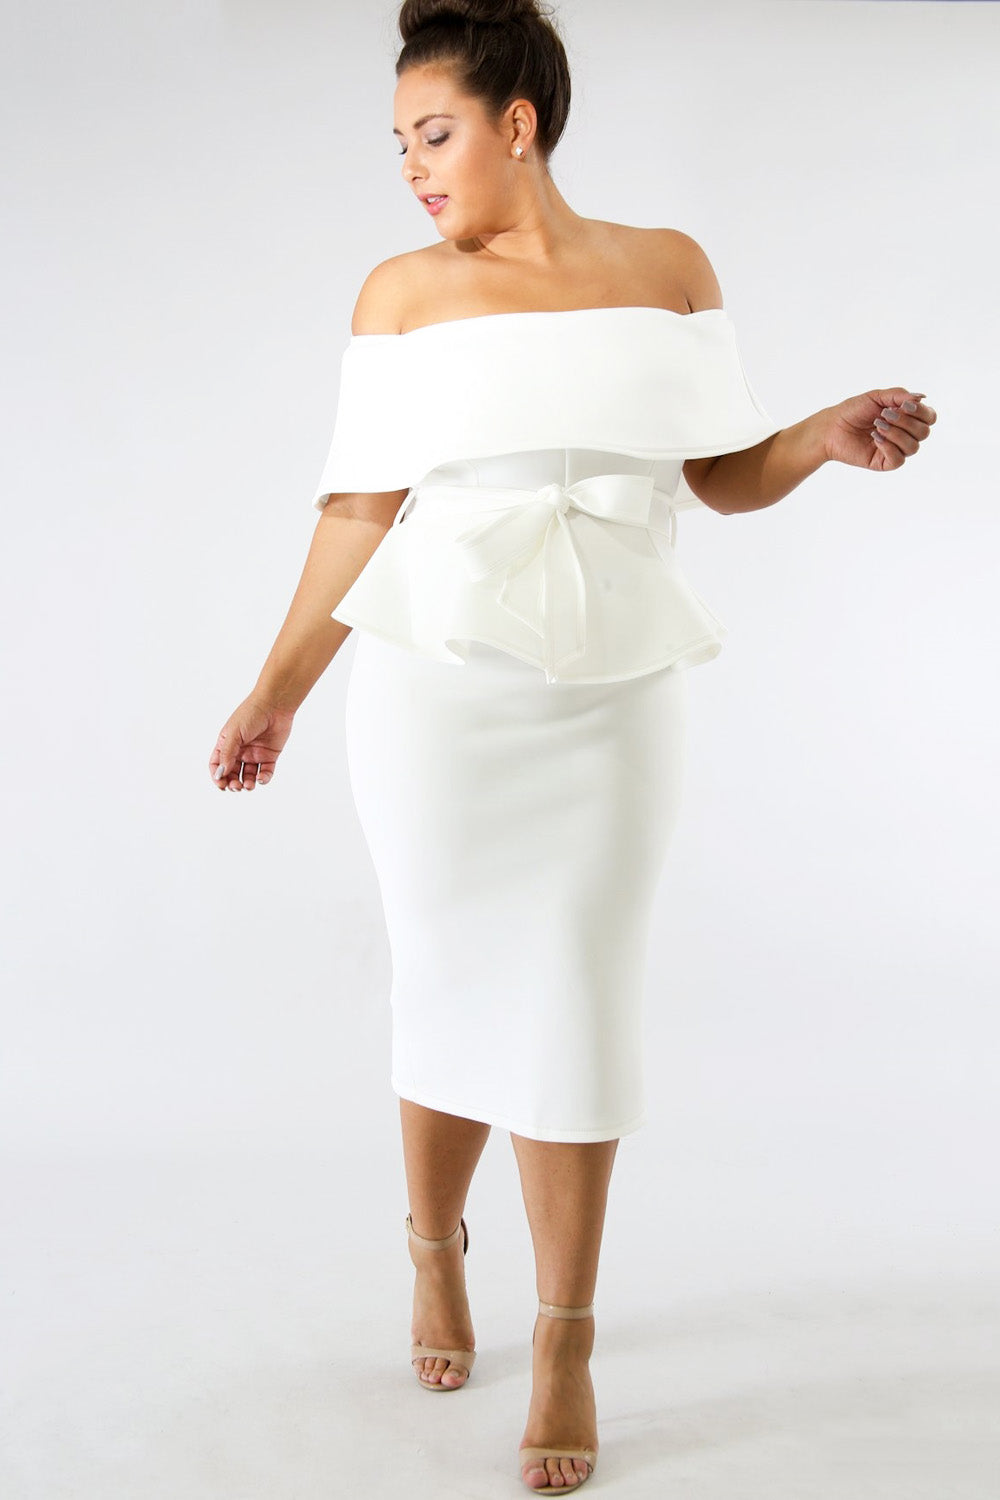 goPals white 2 piece set plus size with off-the-shoulder top and pencil skirt. 